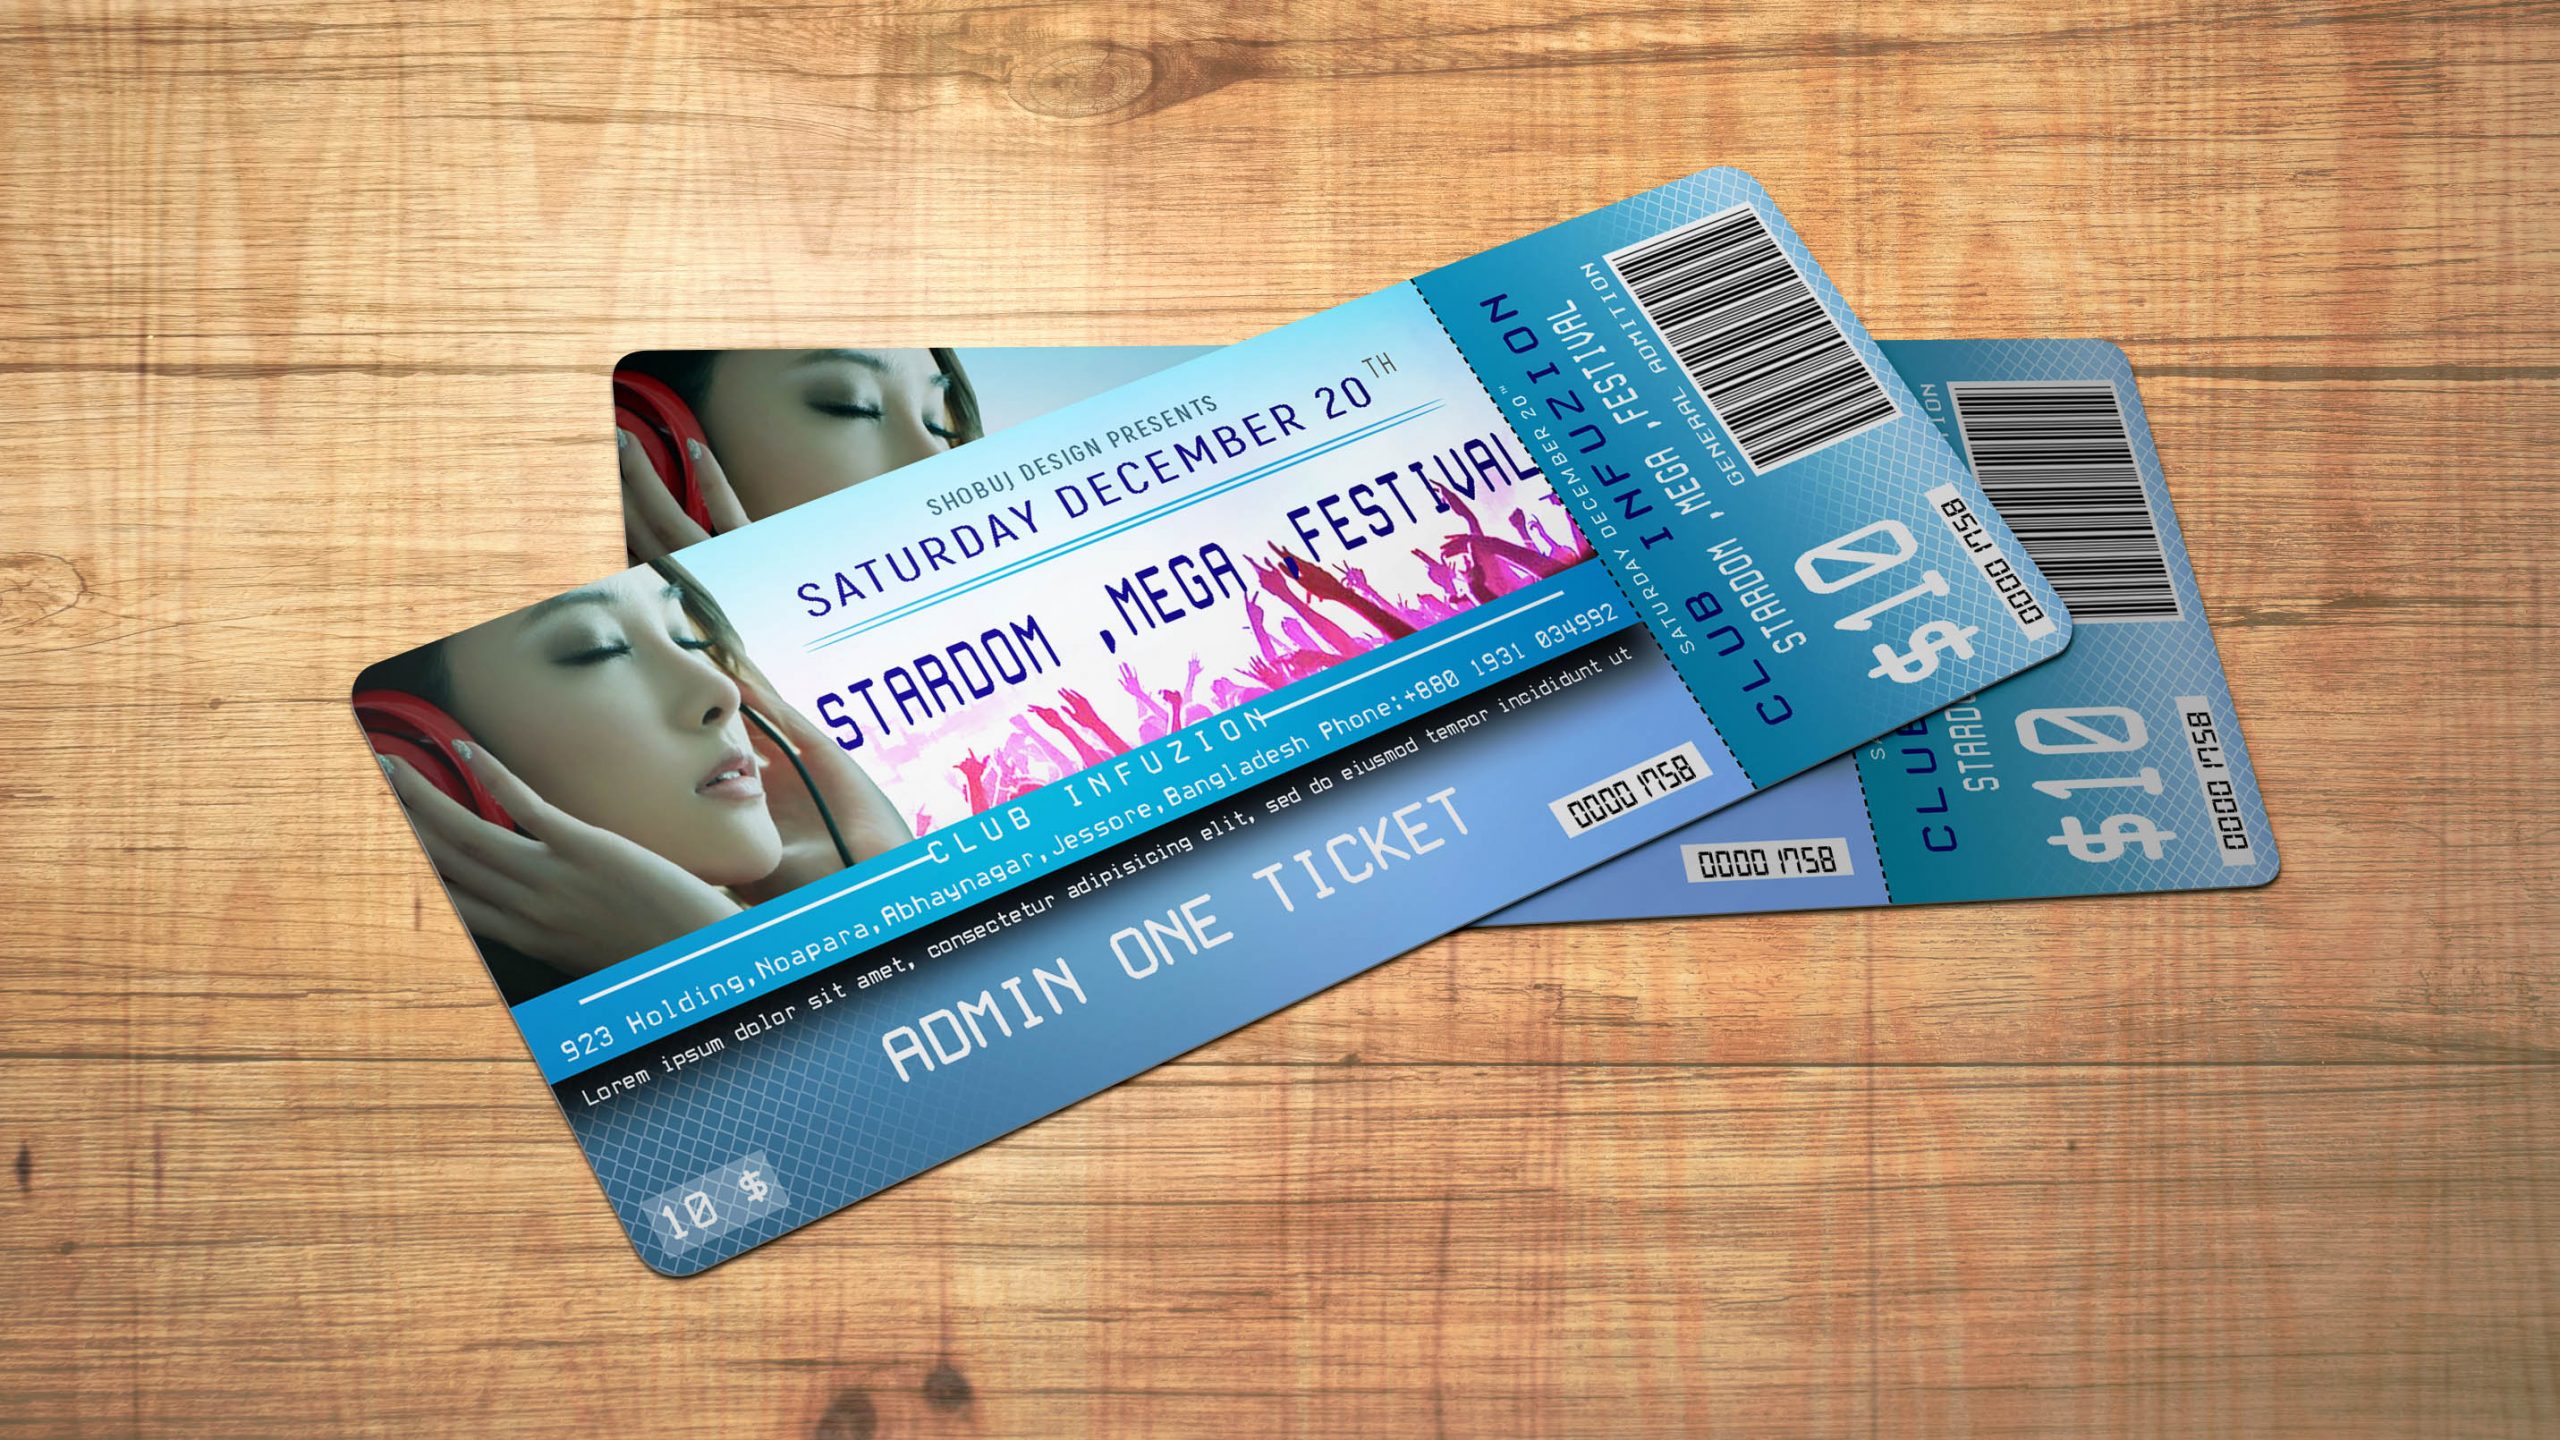 Musical EventTicket Design Free Template PSD GraphicsFamily